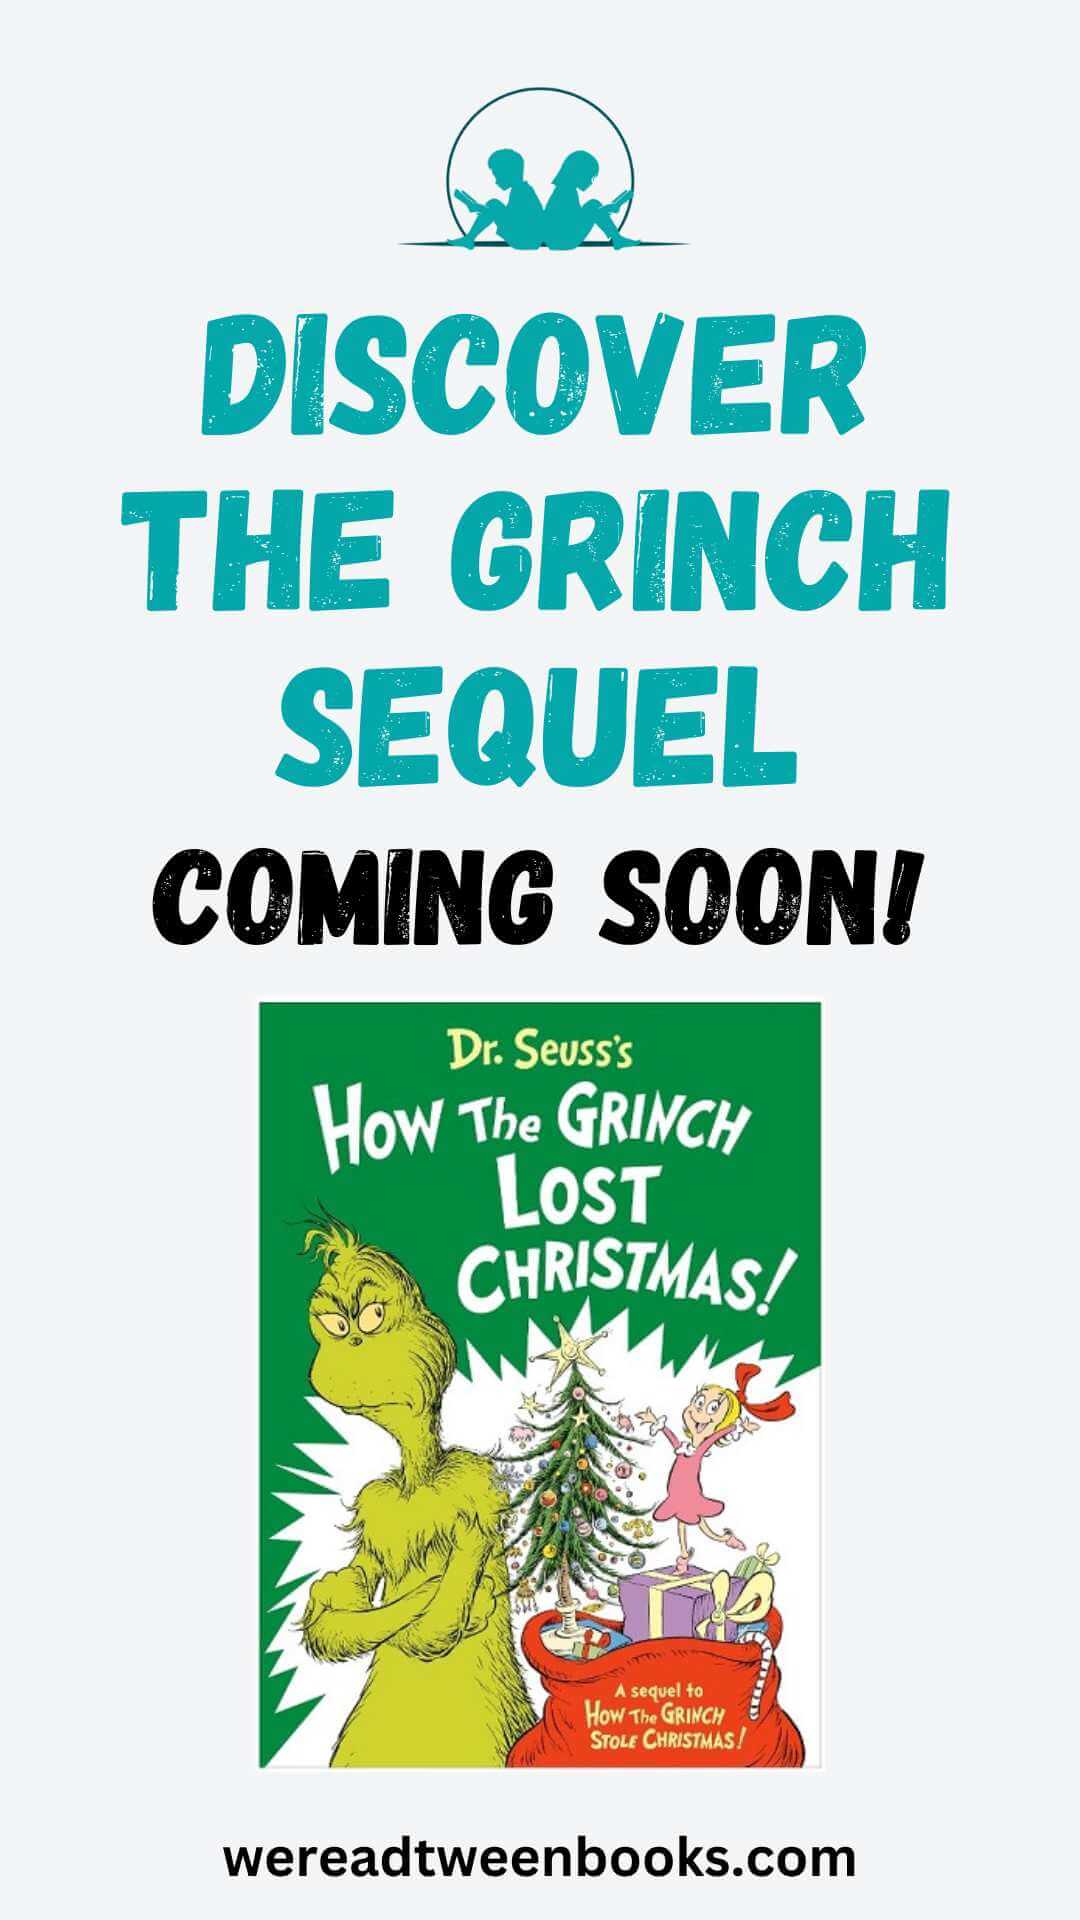 Discover How the Grinch Lost Christmas, the much-anticipated sequel to the holiday classic, How the Grinch Stole Christmas in this post from We Read Tween Books.